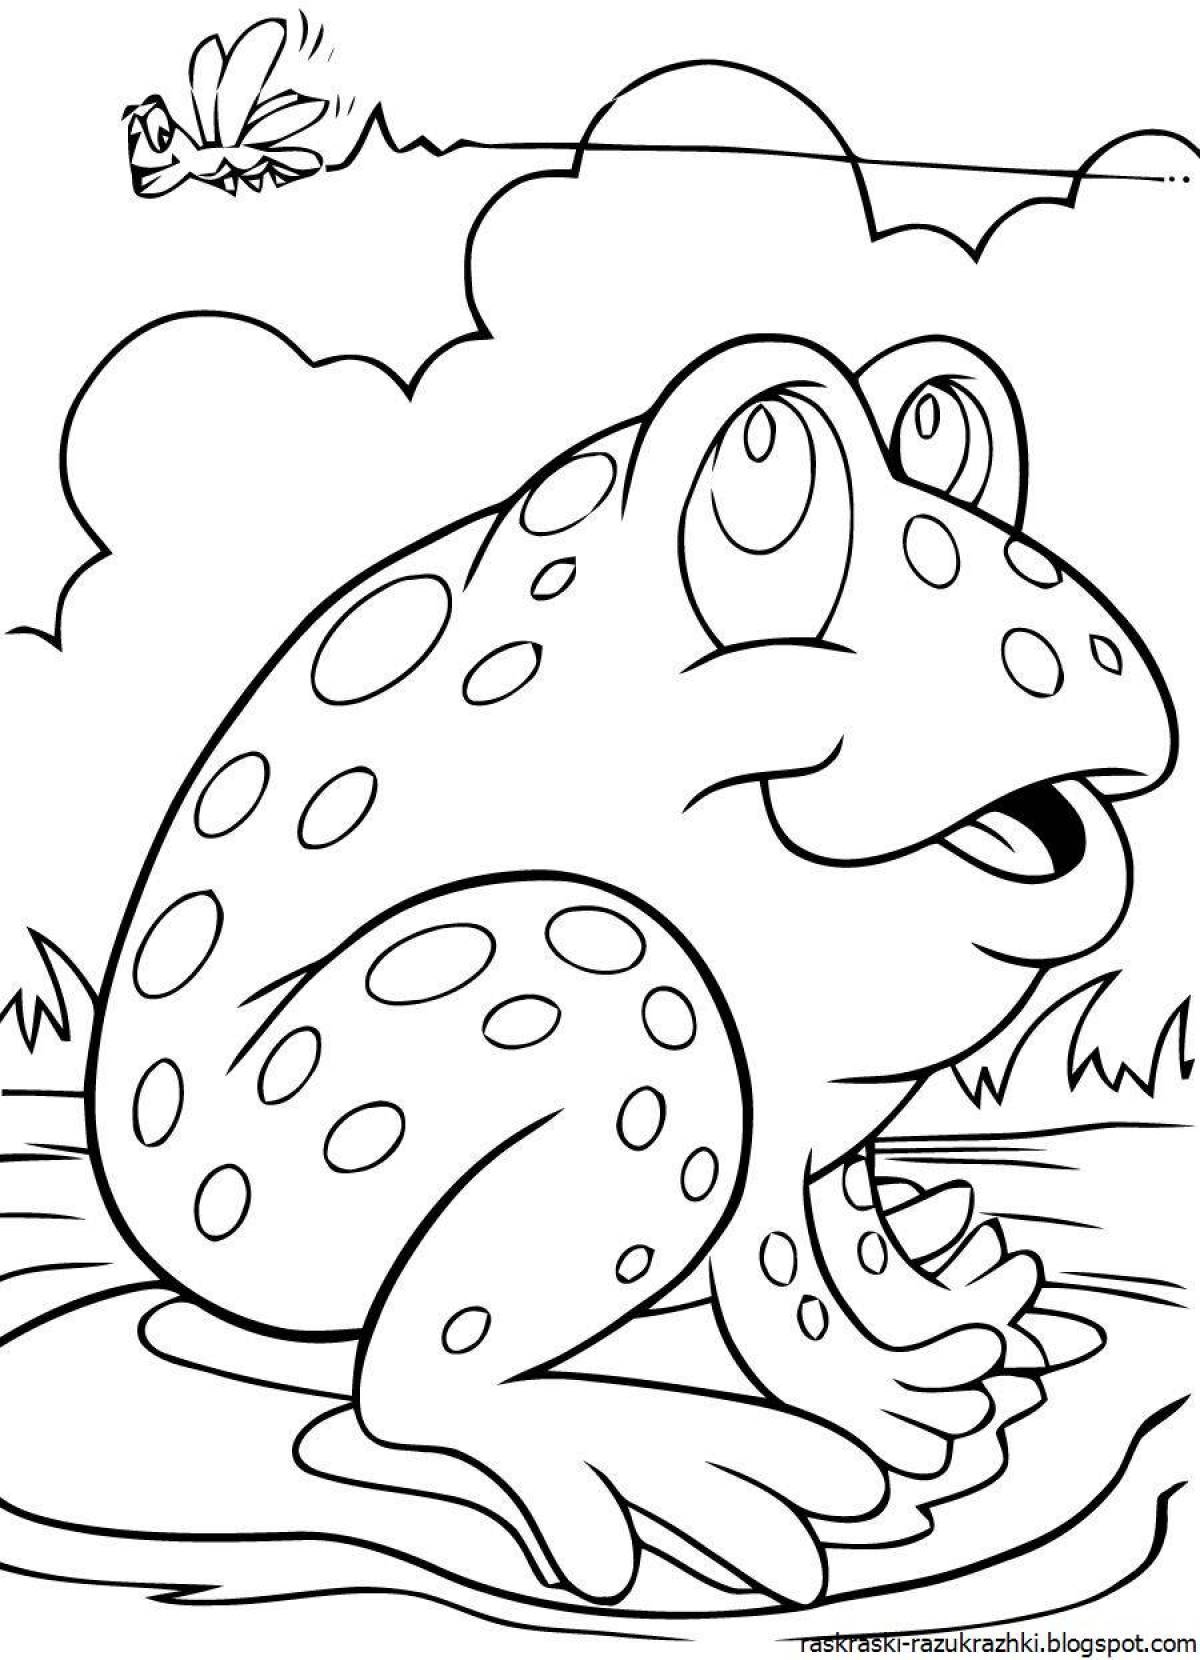 Amazing animal coloring pages for 5-7 year olds